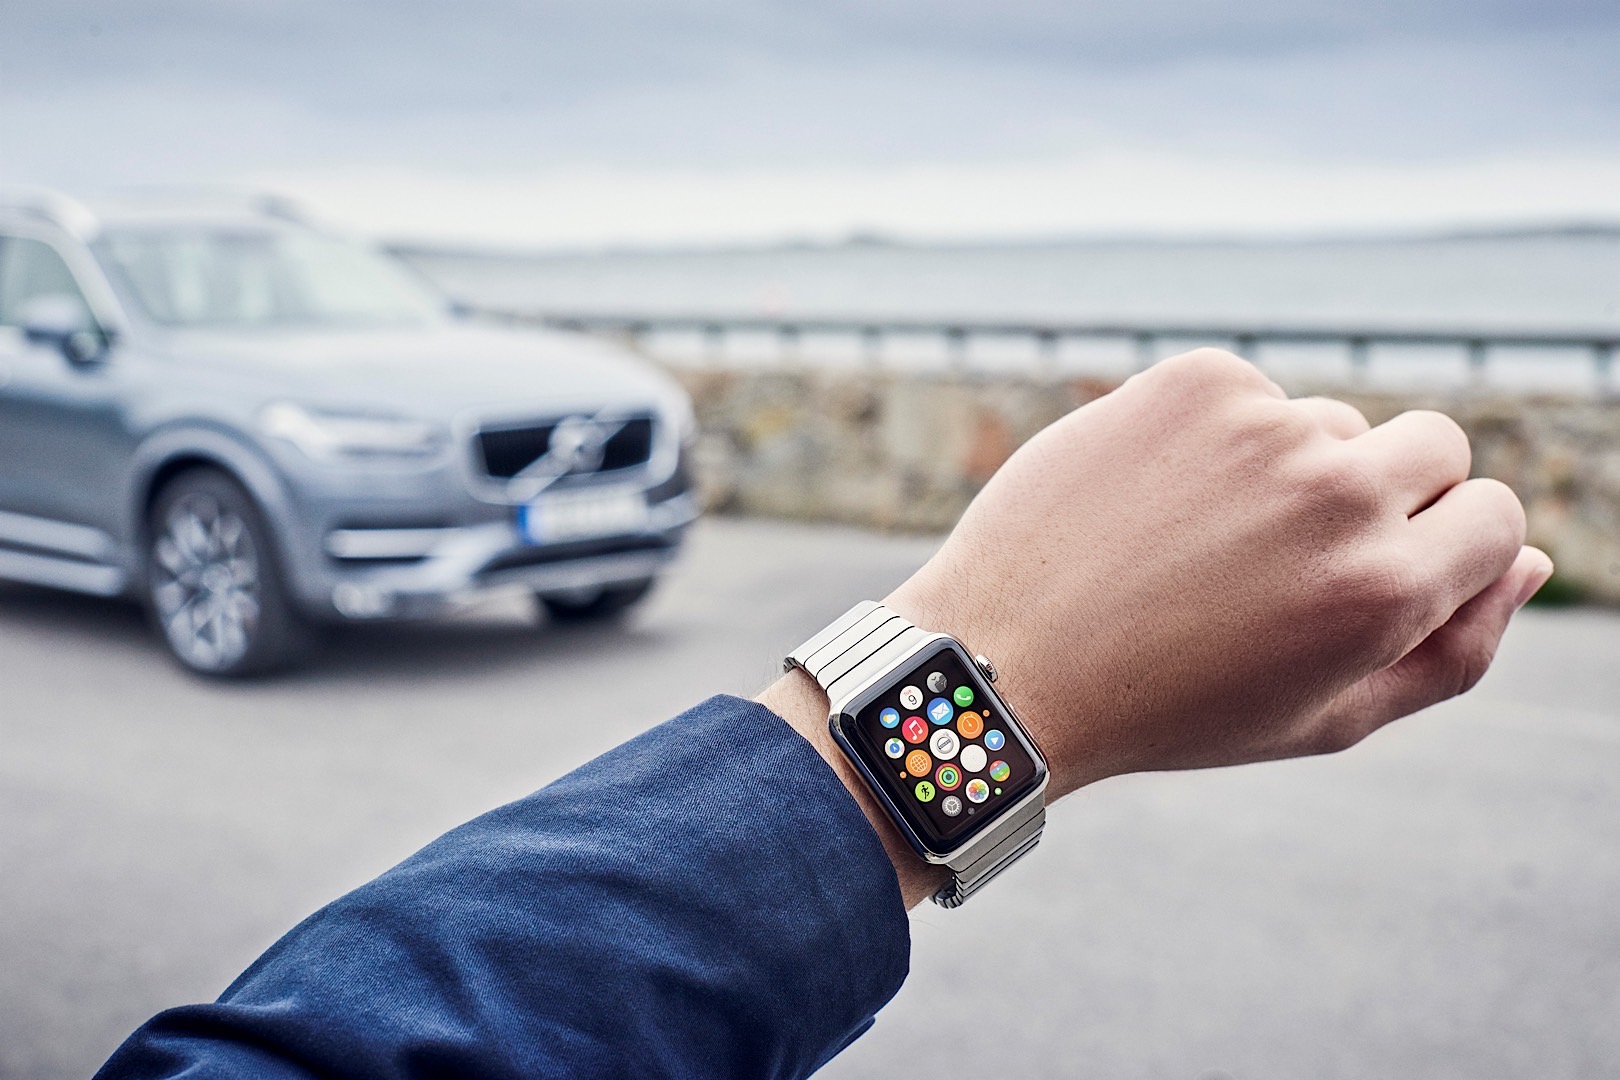 Volvo On Call technology updated, now smartwatch compatible